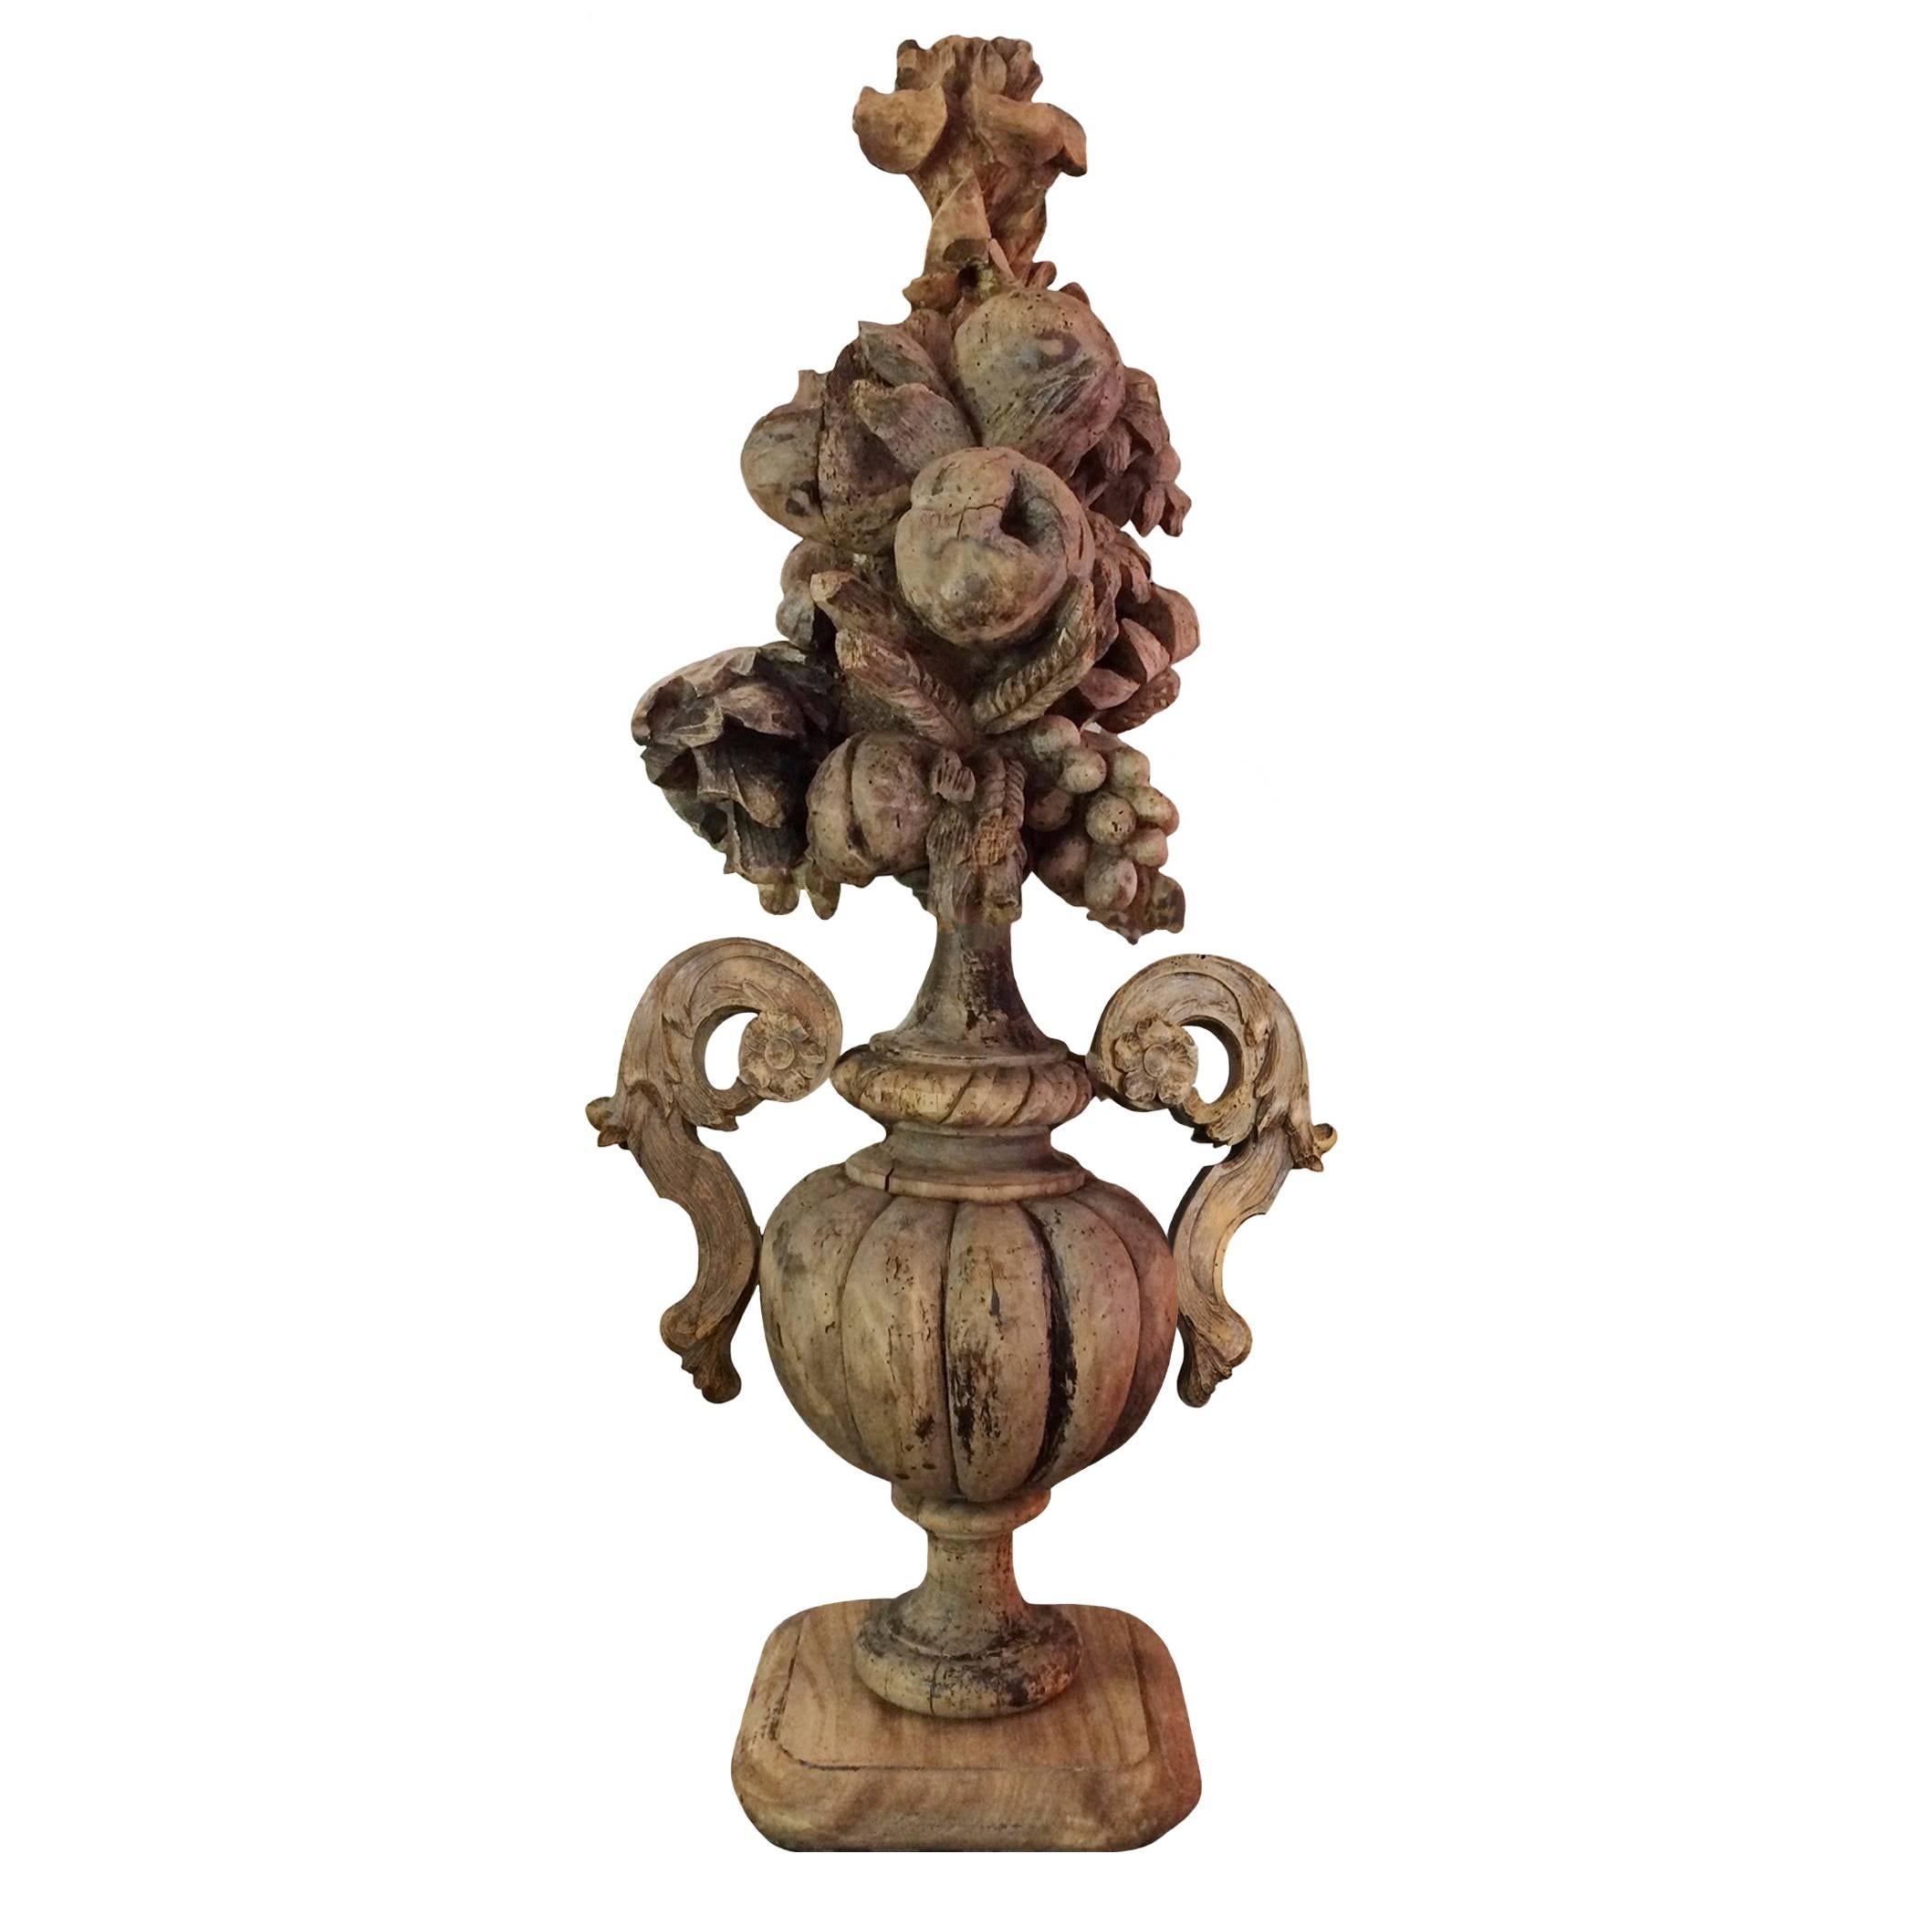 A pair of very tall, intricately carved French walnut urns; topped with a cornucopia of fruits and flowers, 18th century. Spectacular carving all of the way around. Natural aged patina.